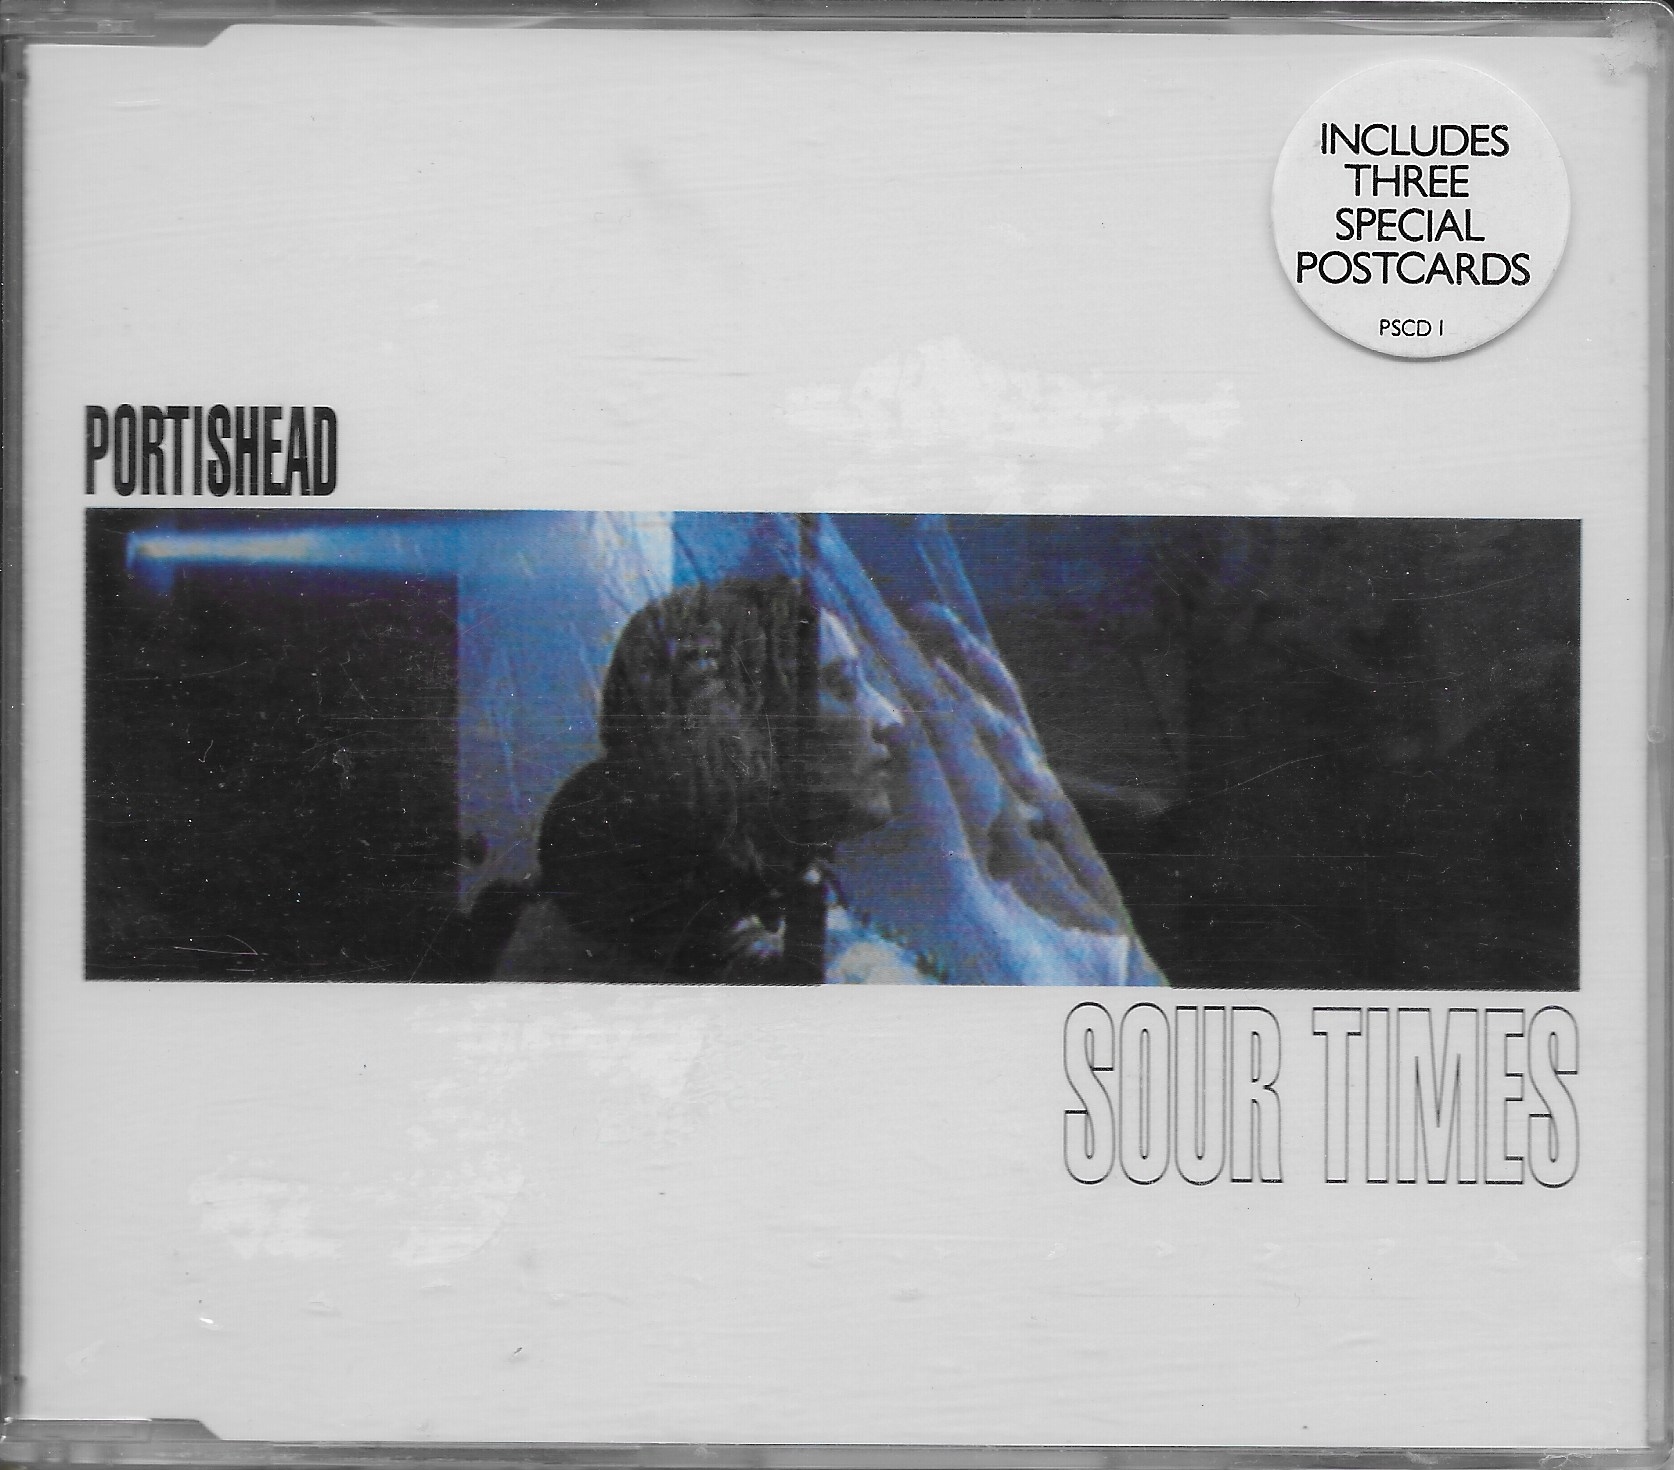 Picture of GOLCD 116 Sour times - Includes 3 limited edition postcards by artist Portishead  